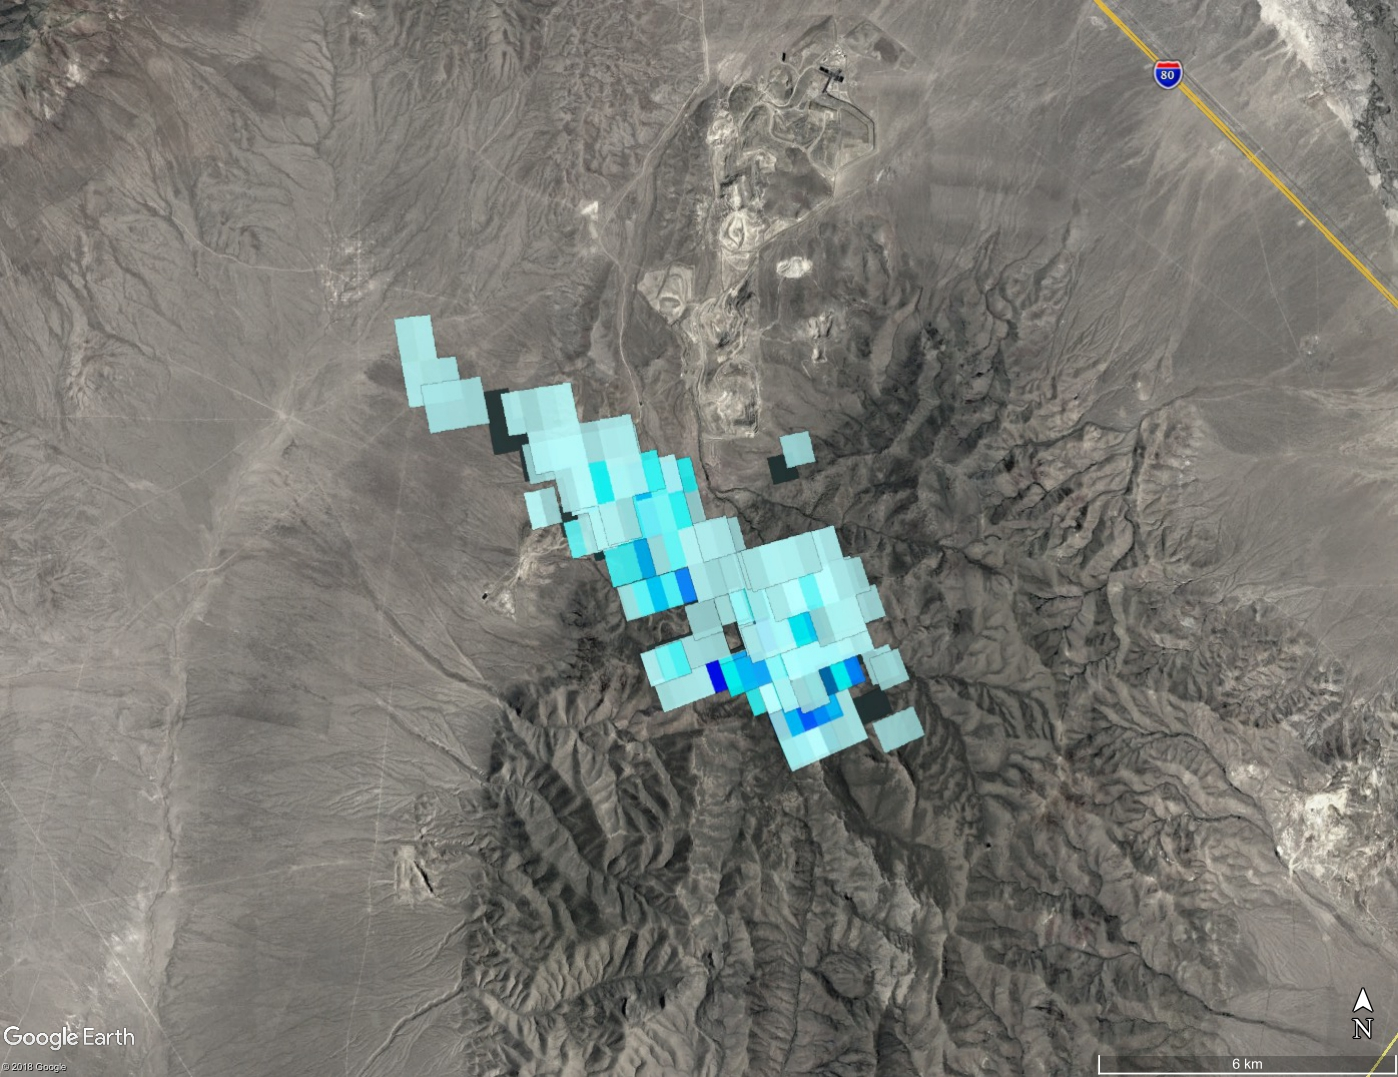 This composite image shows all the radar signatures from falling meteorites as blue/gray polygons. The Battle Mountain meteorite fall resulted in recovery of a large number of meteorites.